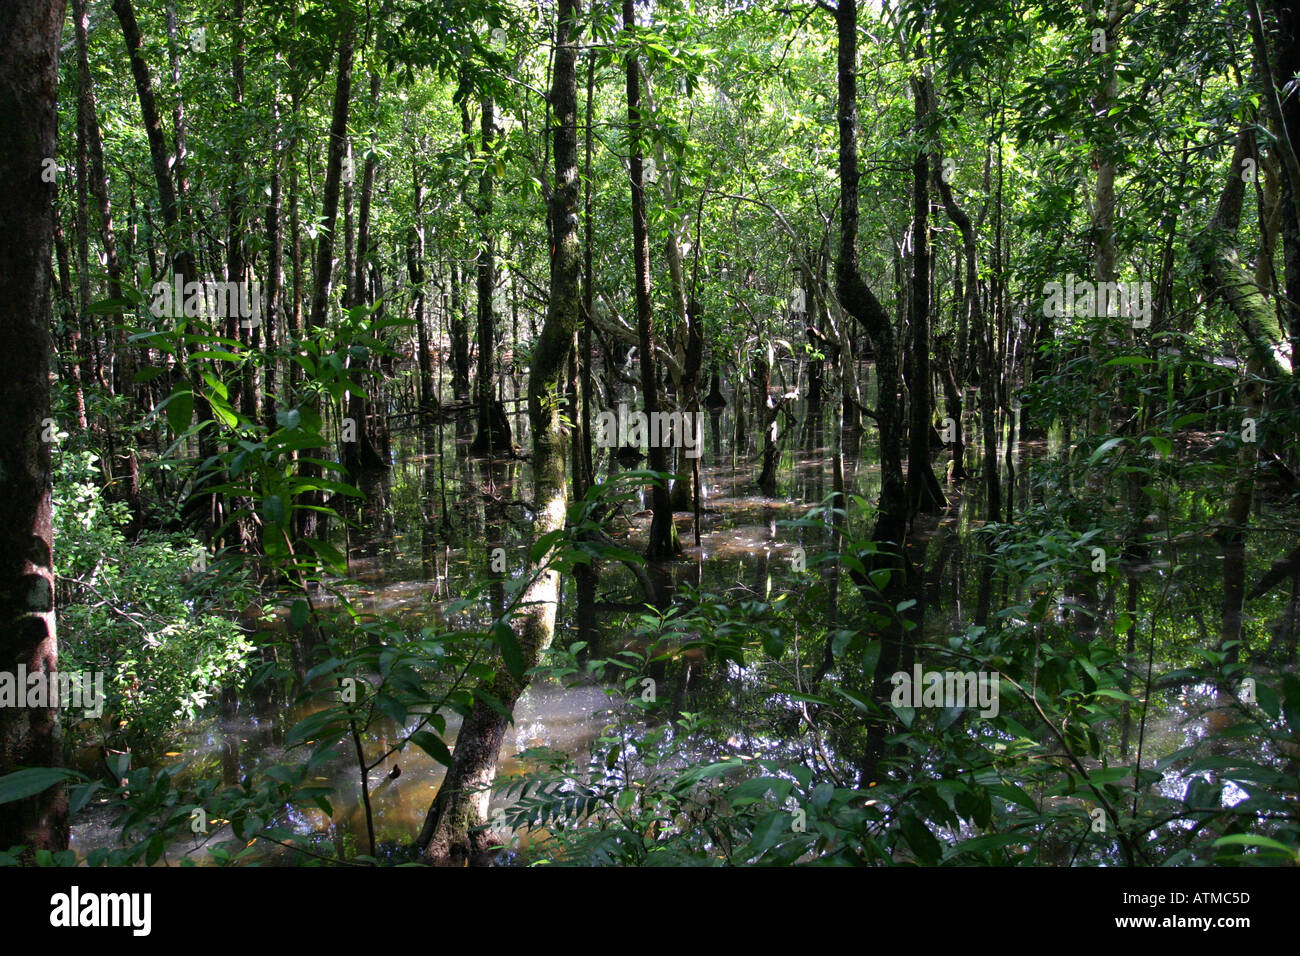 Lush green plants contrast with brown water in this mangrove swamp Daintree rainforest Cape Tribulation Australia Stock Photo